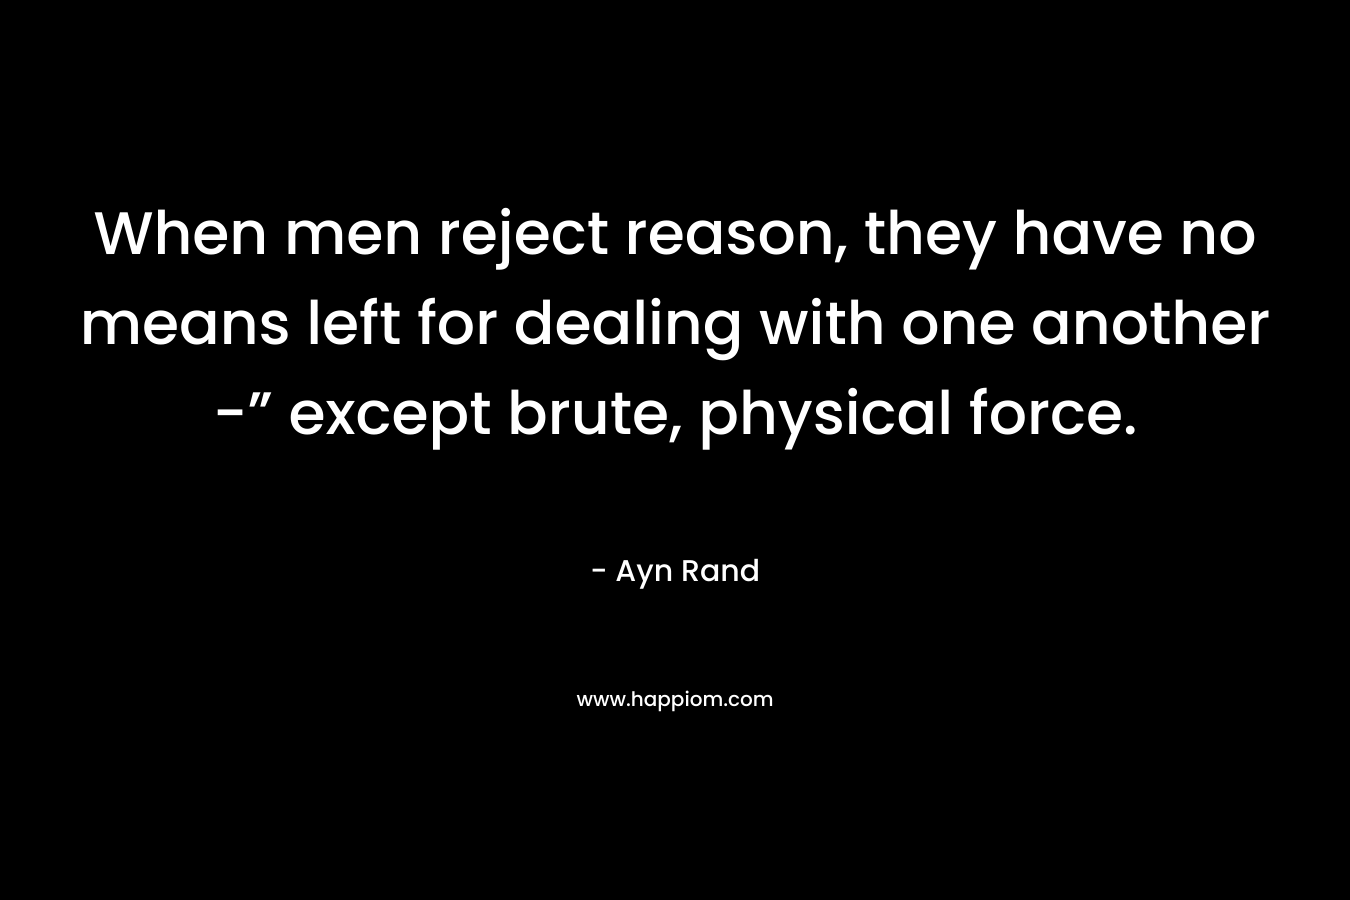 When men reject reason, they have no means left for dealing with one another -” except brute, physical force.